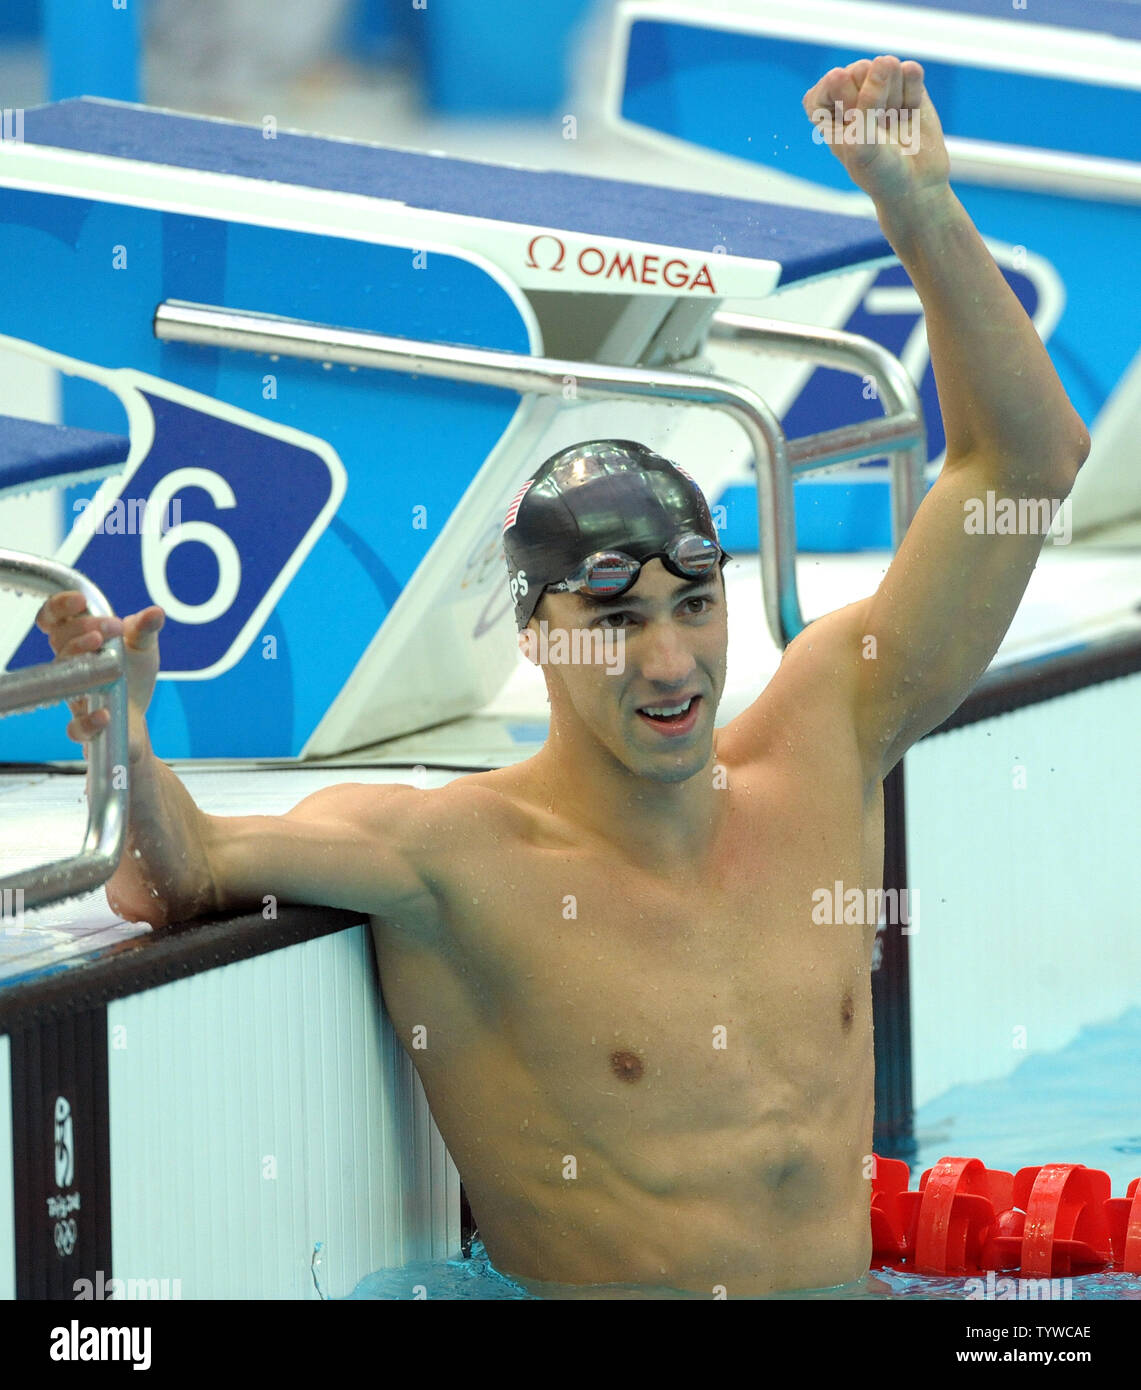 USA's Michael Phelps celebrates after racing for his 7th gold medal in the Men's 100M Butterfly final at the National Aquatic Center (Water Cube) during the 2008 Summer Olympics in Beijing, China, on August 16, 2008. Phelps is tied with Mark Spitz, the swimmer who set the record for 7 gold medals in a single Olympics in Munich, 1972.  (UPI Photo/Roger L. Wollenberg) Stock Photo